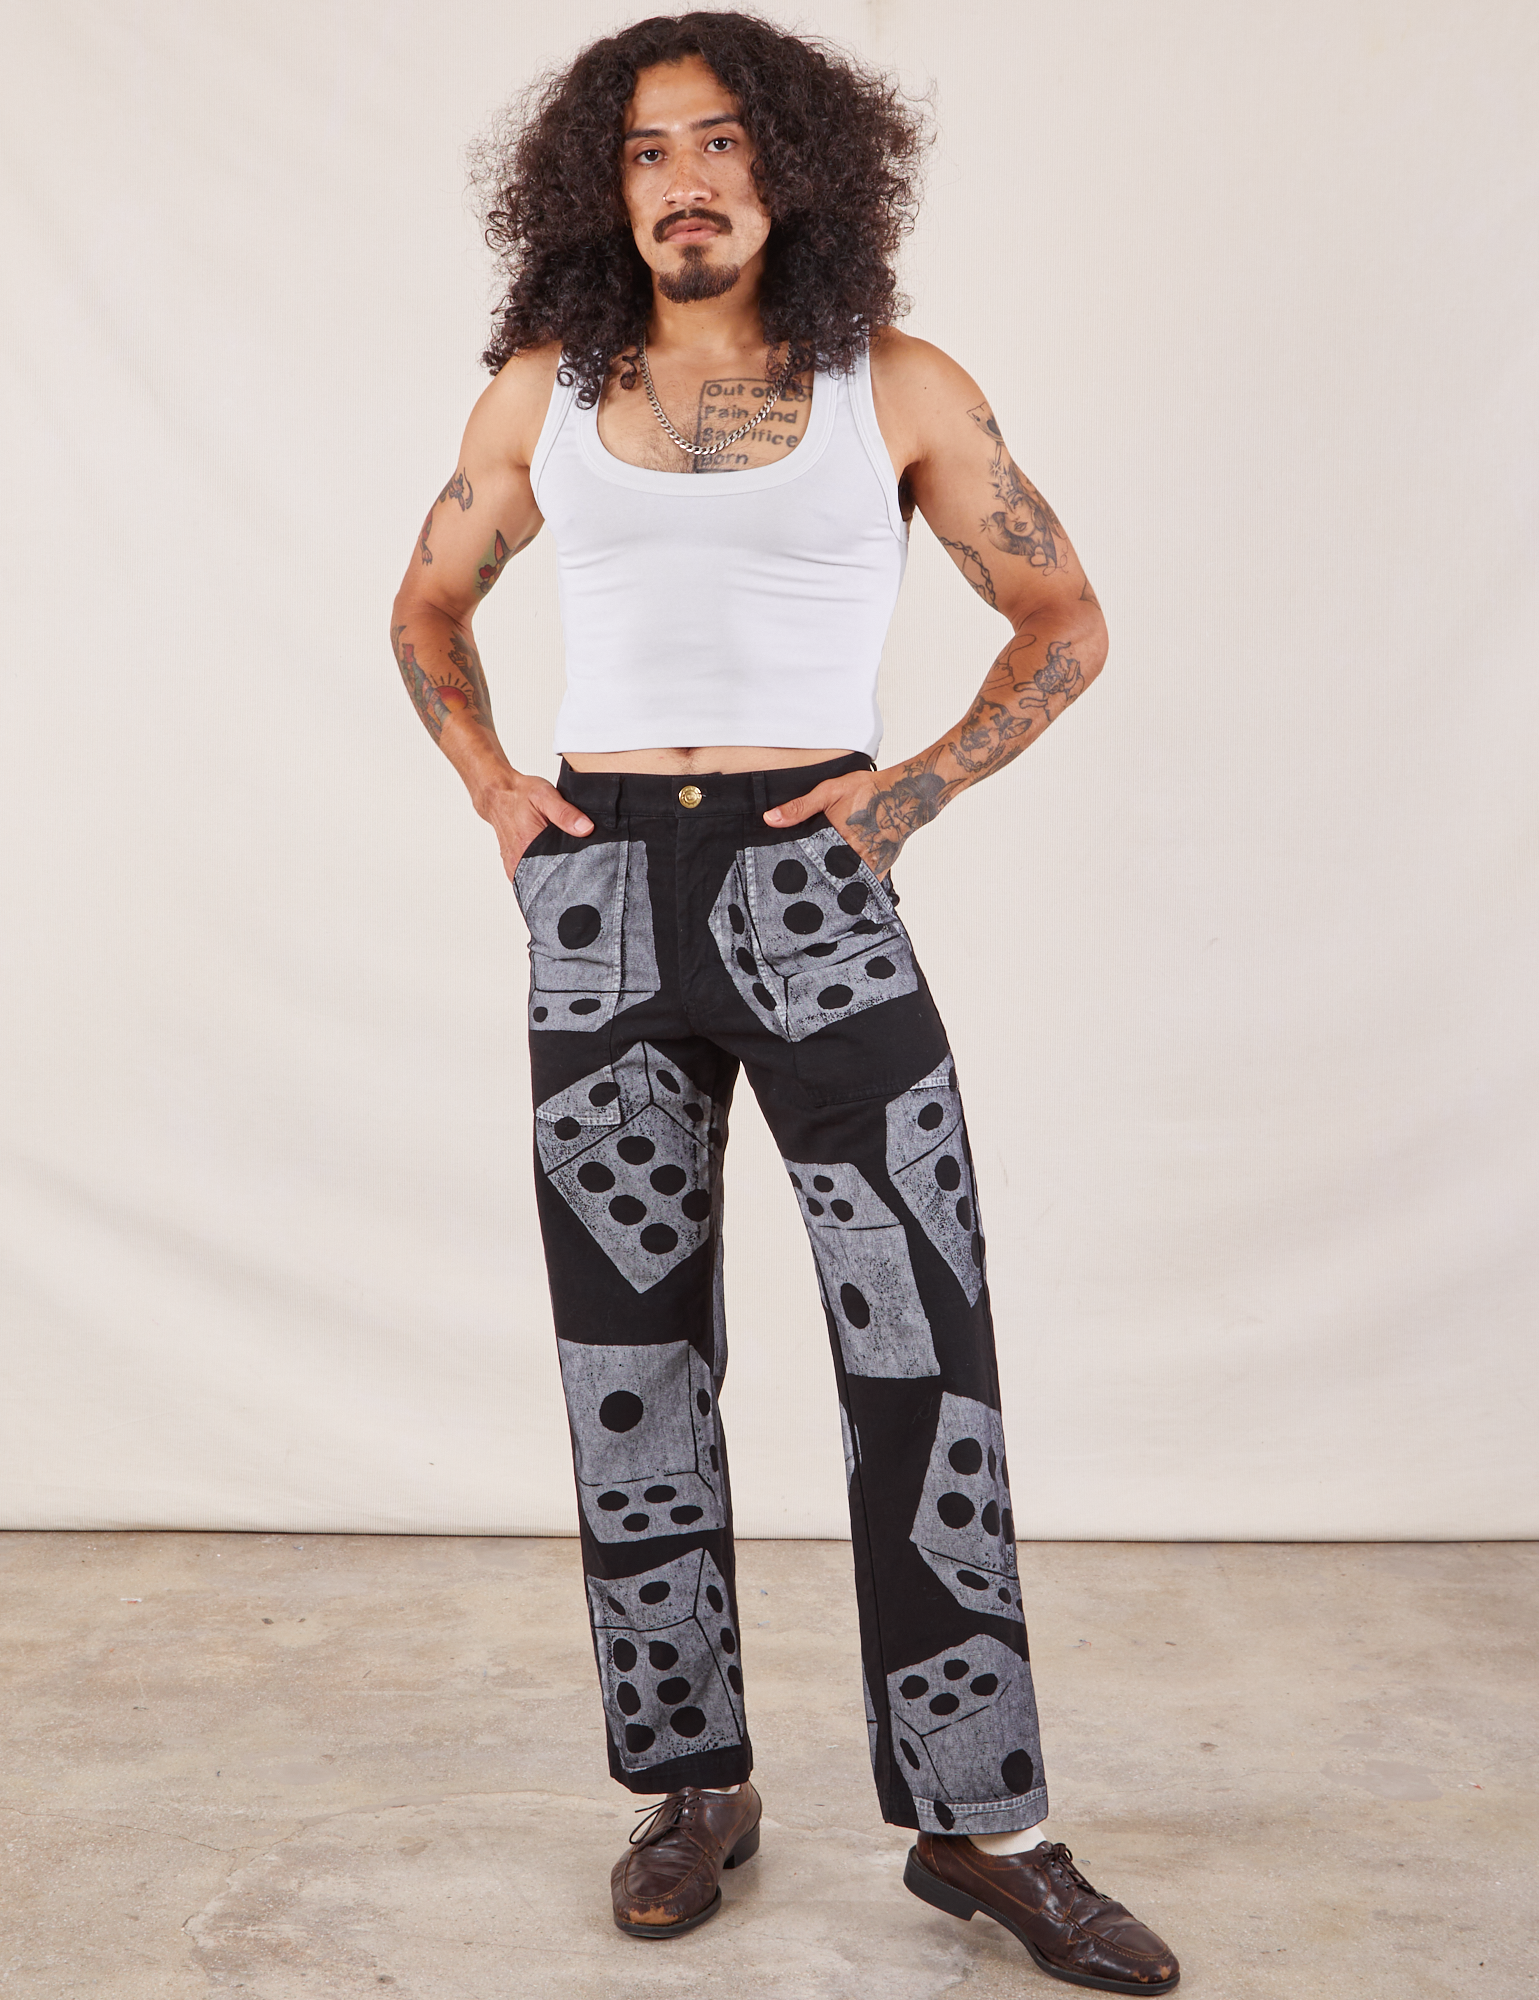 Jesse is 5'8" and wearing XS Icon Work Pants in Dice (Black)